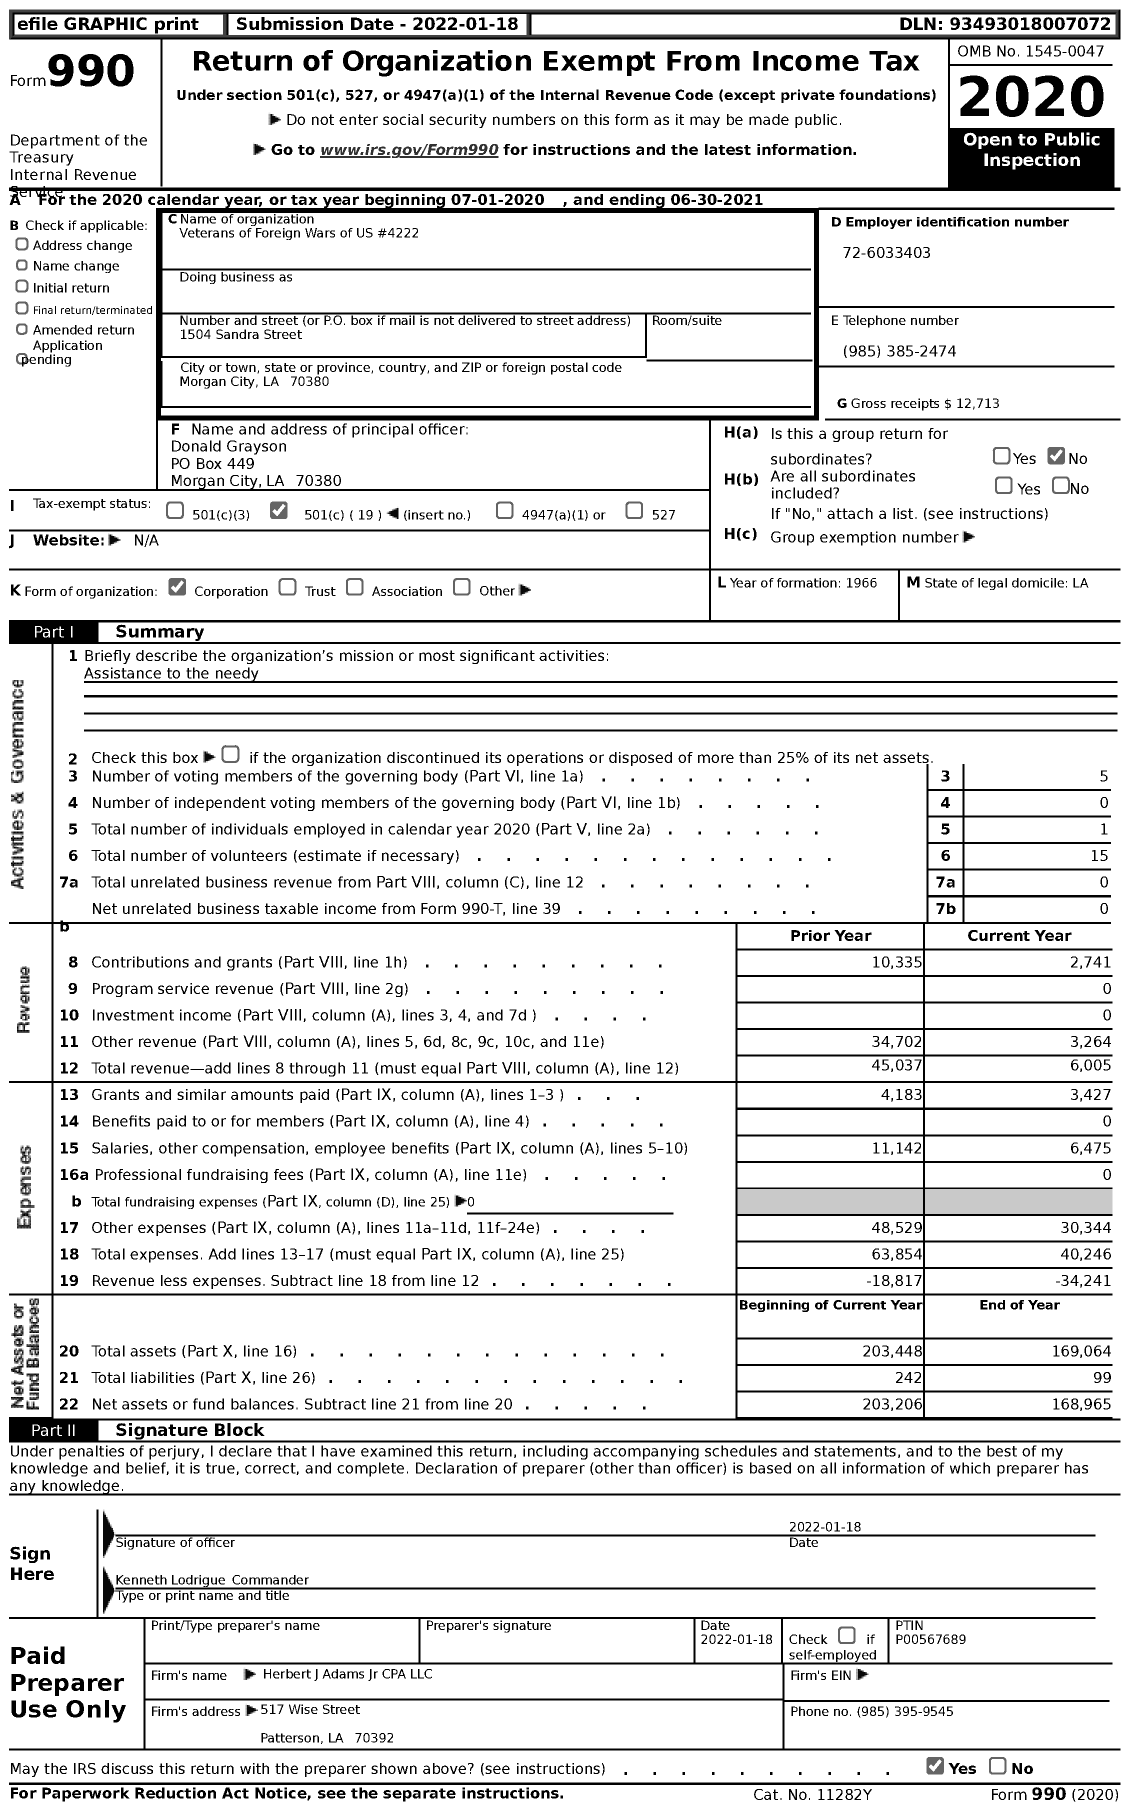 Image of first page of 2020 Form 990 for Veterans of Foreign Wars of the United States Dept of Louisiana - 4222 Oil Center